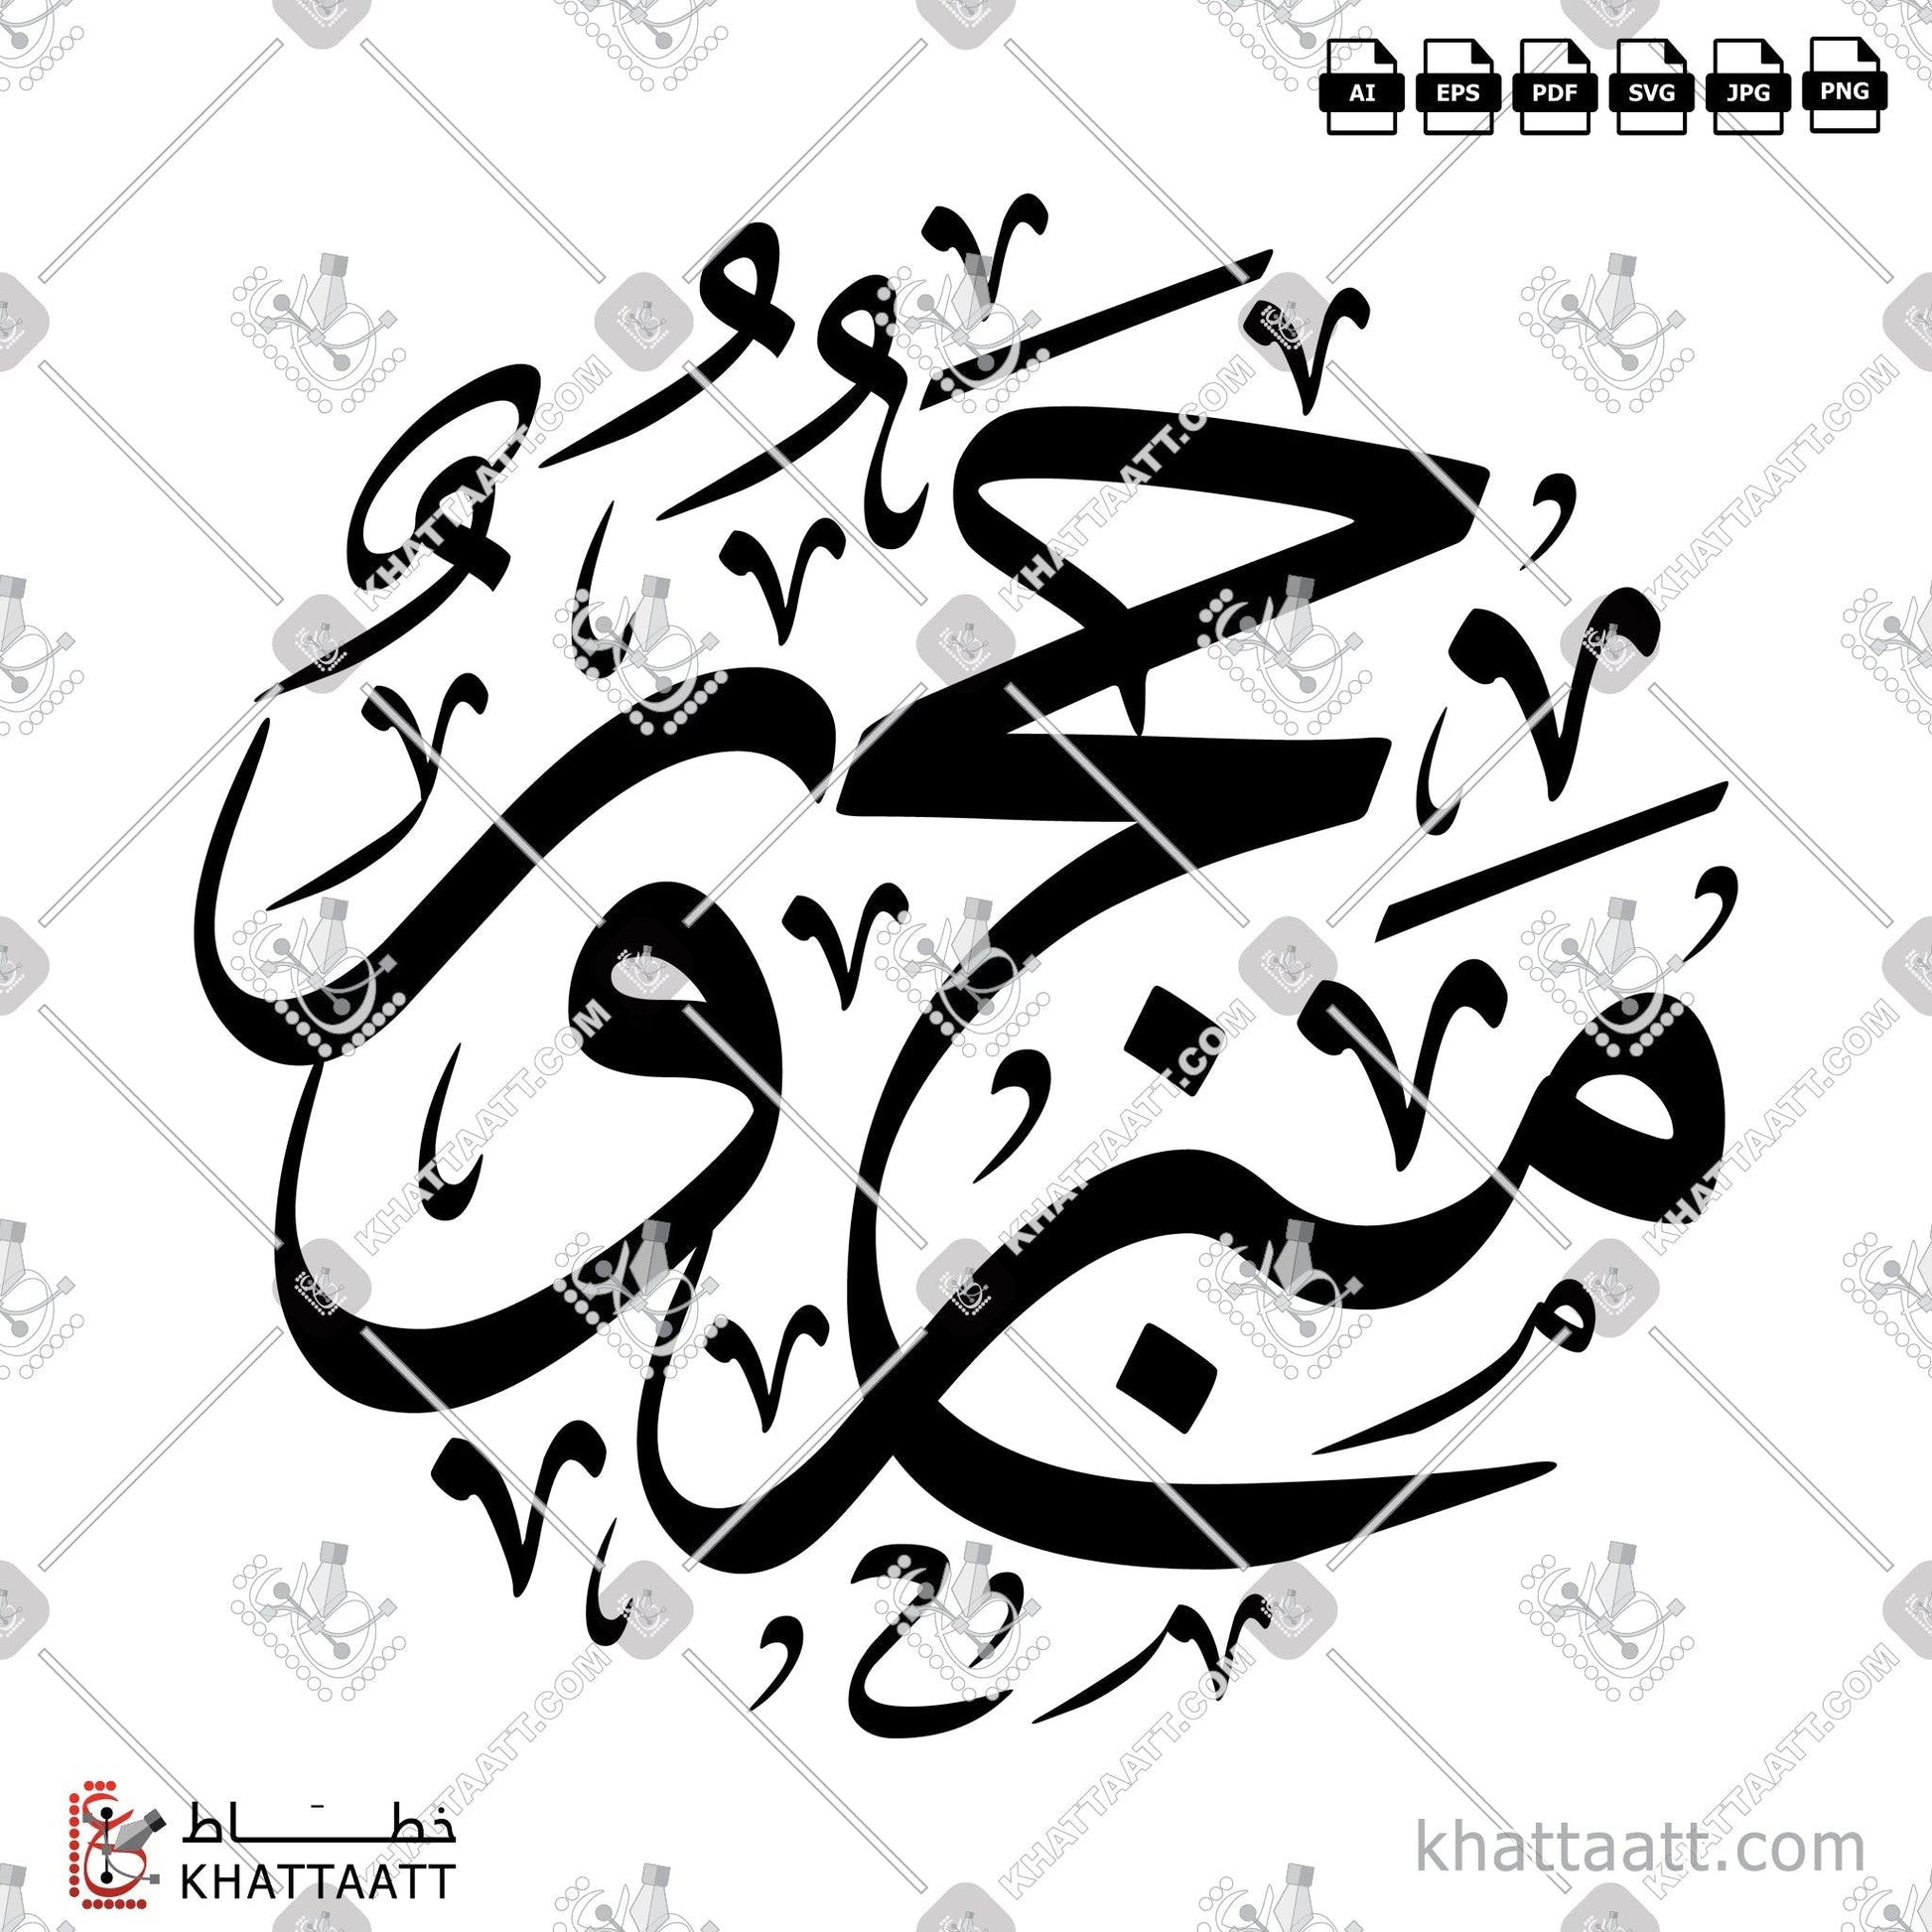 Download Arabic Calligraphy of حج مبرور in Thuluth - خط الثلث in vector and .png